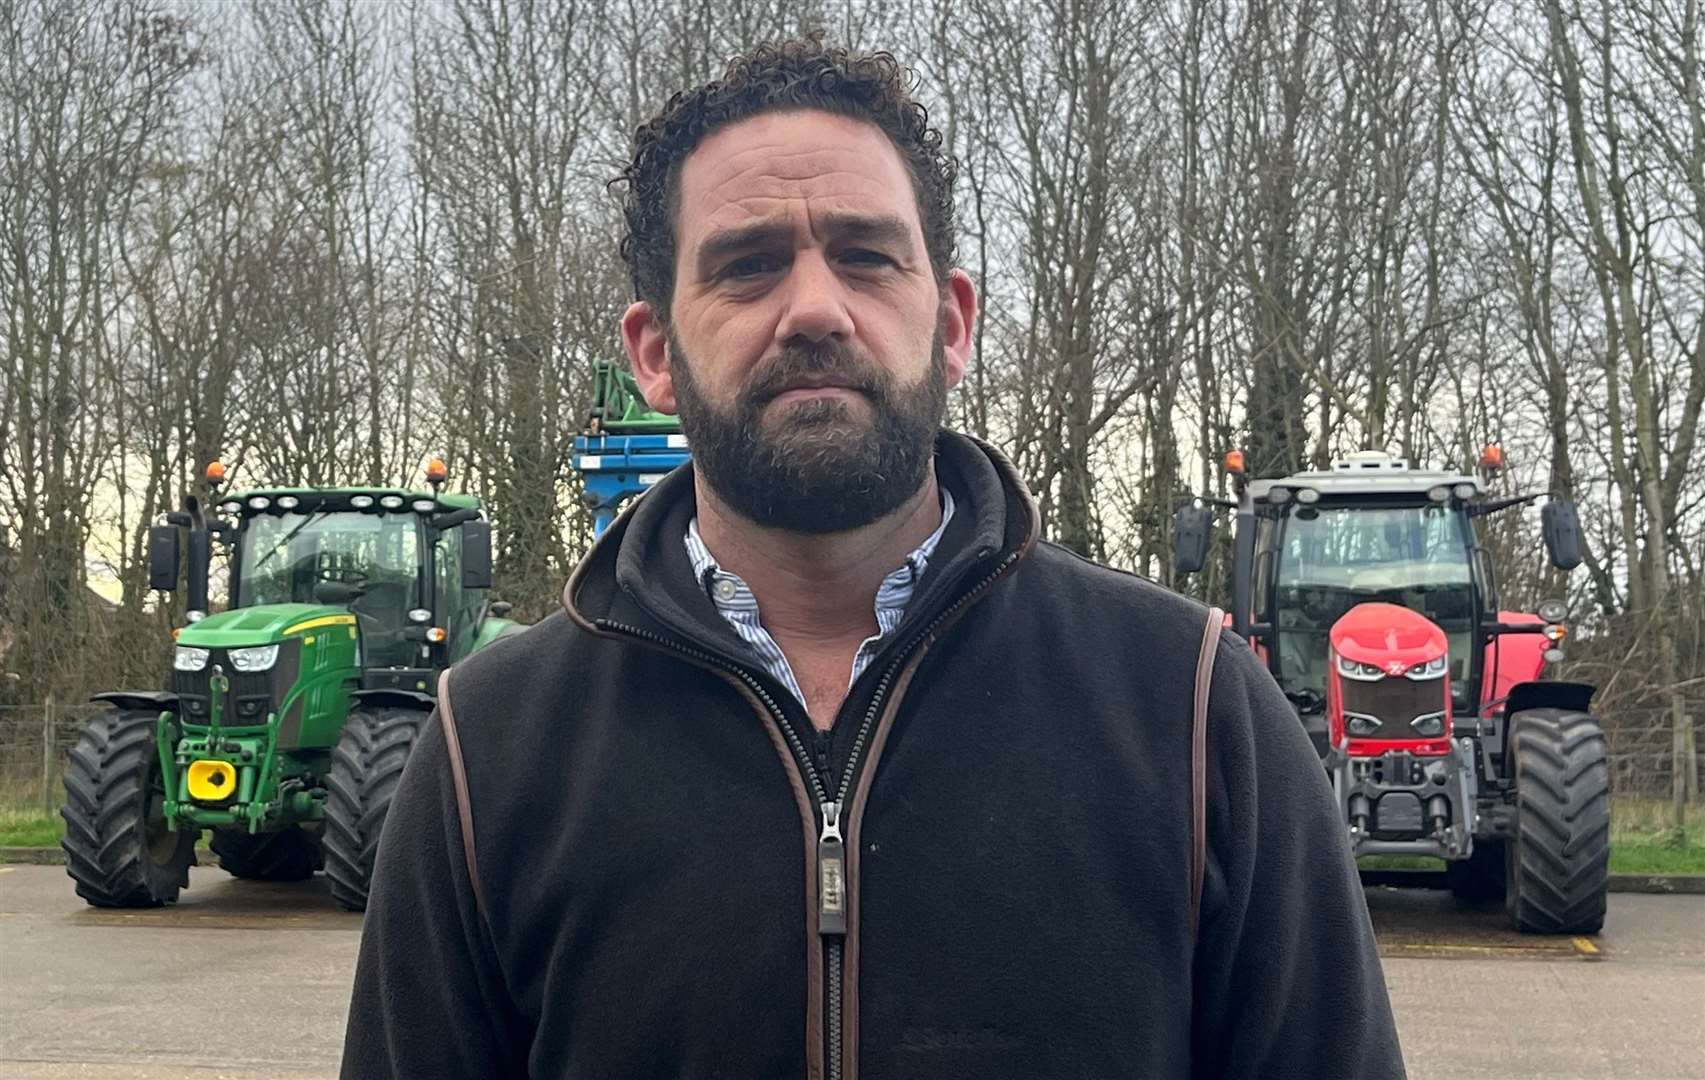 Andrew Gibson, 42, is a fifth generation farmer from Wingham